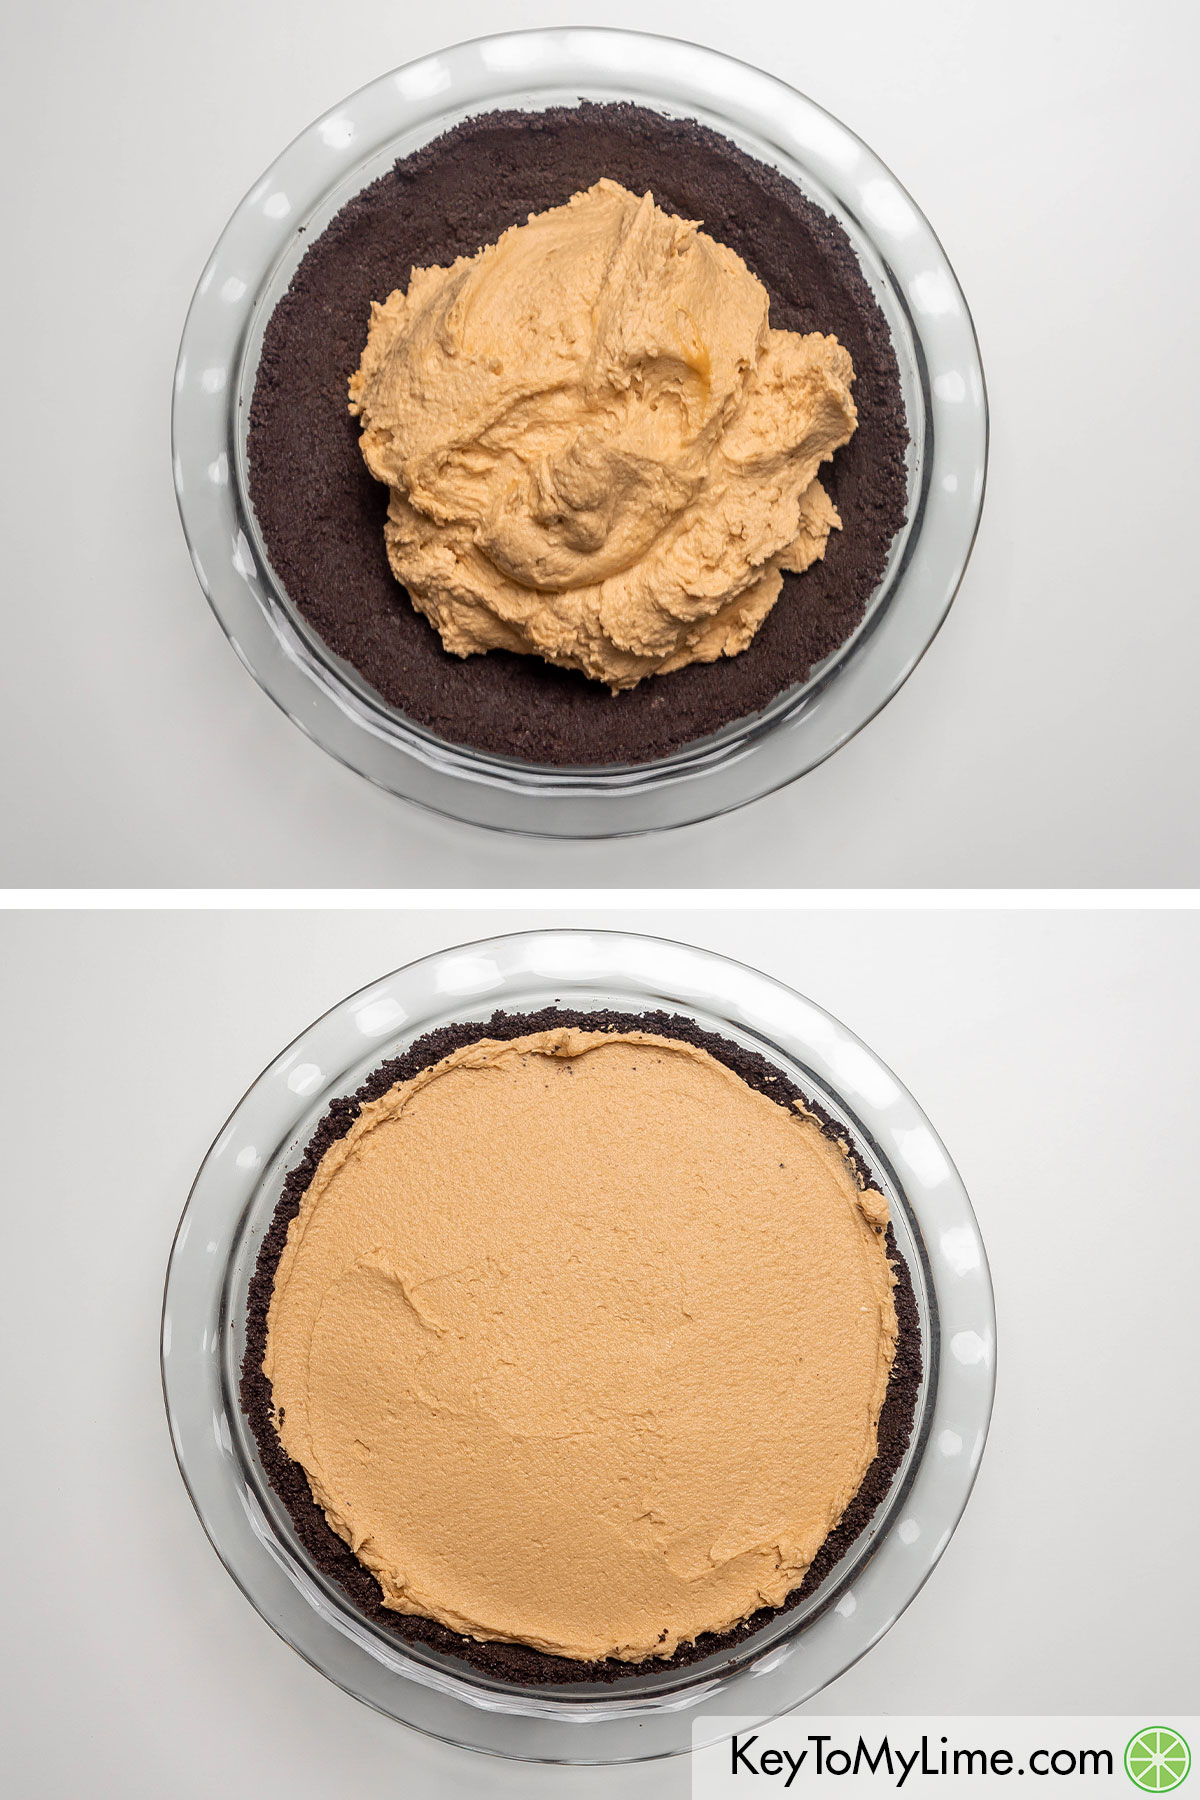 Removing the pie crust from the freezer and filling with the peanut butter mixture on top.